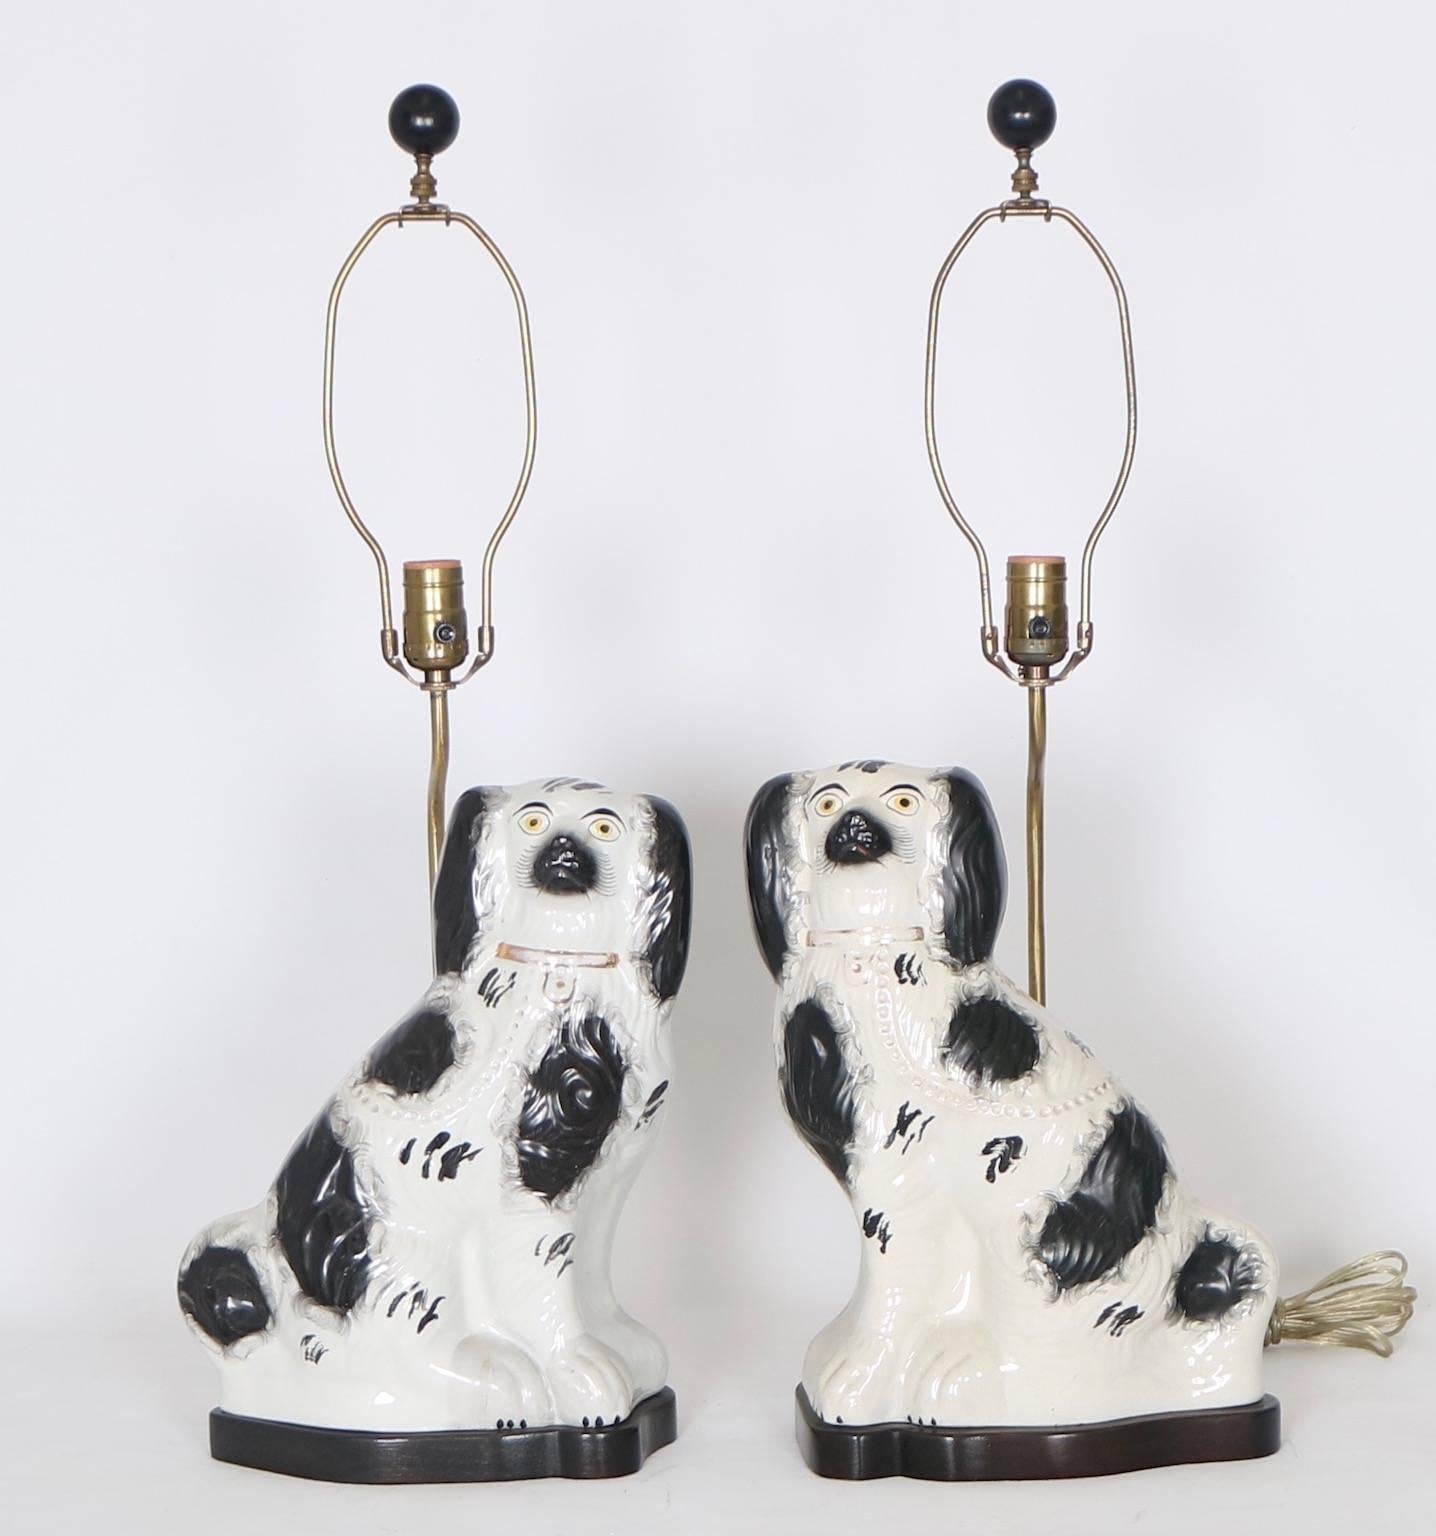 Pair of late 19th century Victorian era Stafforshire porcelain dogs, hand-painted in black and white with gilding to the collars. No marks present. These were made into lamps sometime in the 20th century. Each is in excellent antique condition